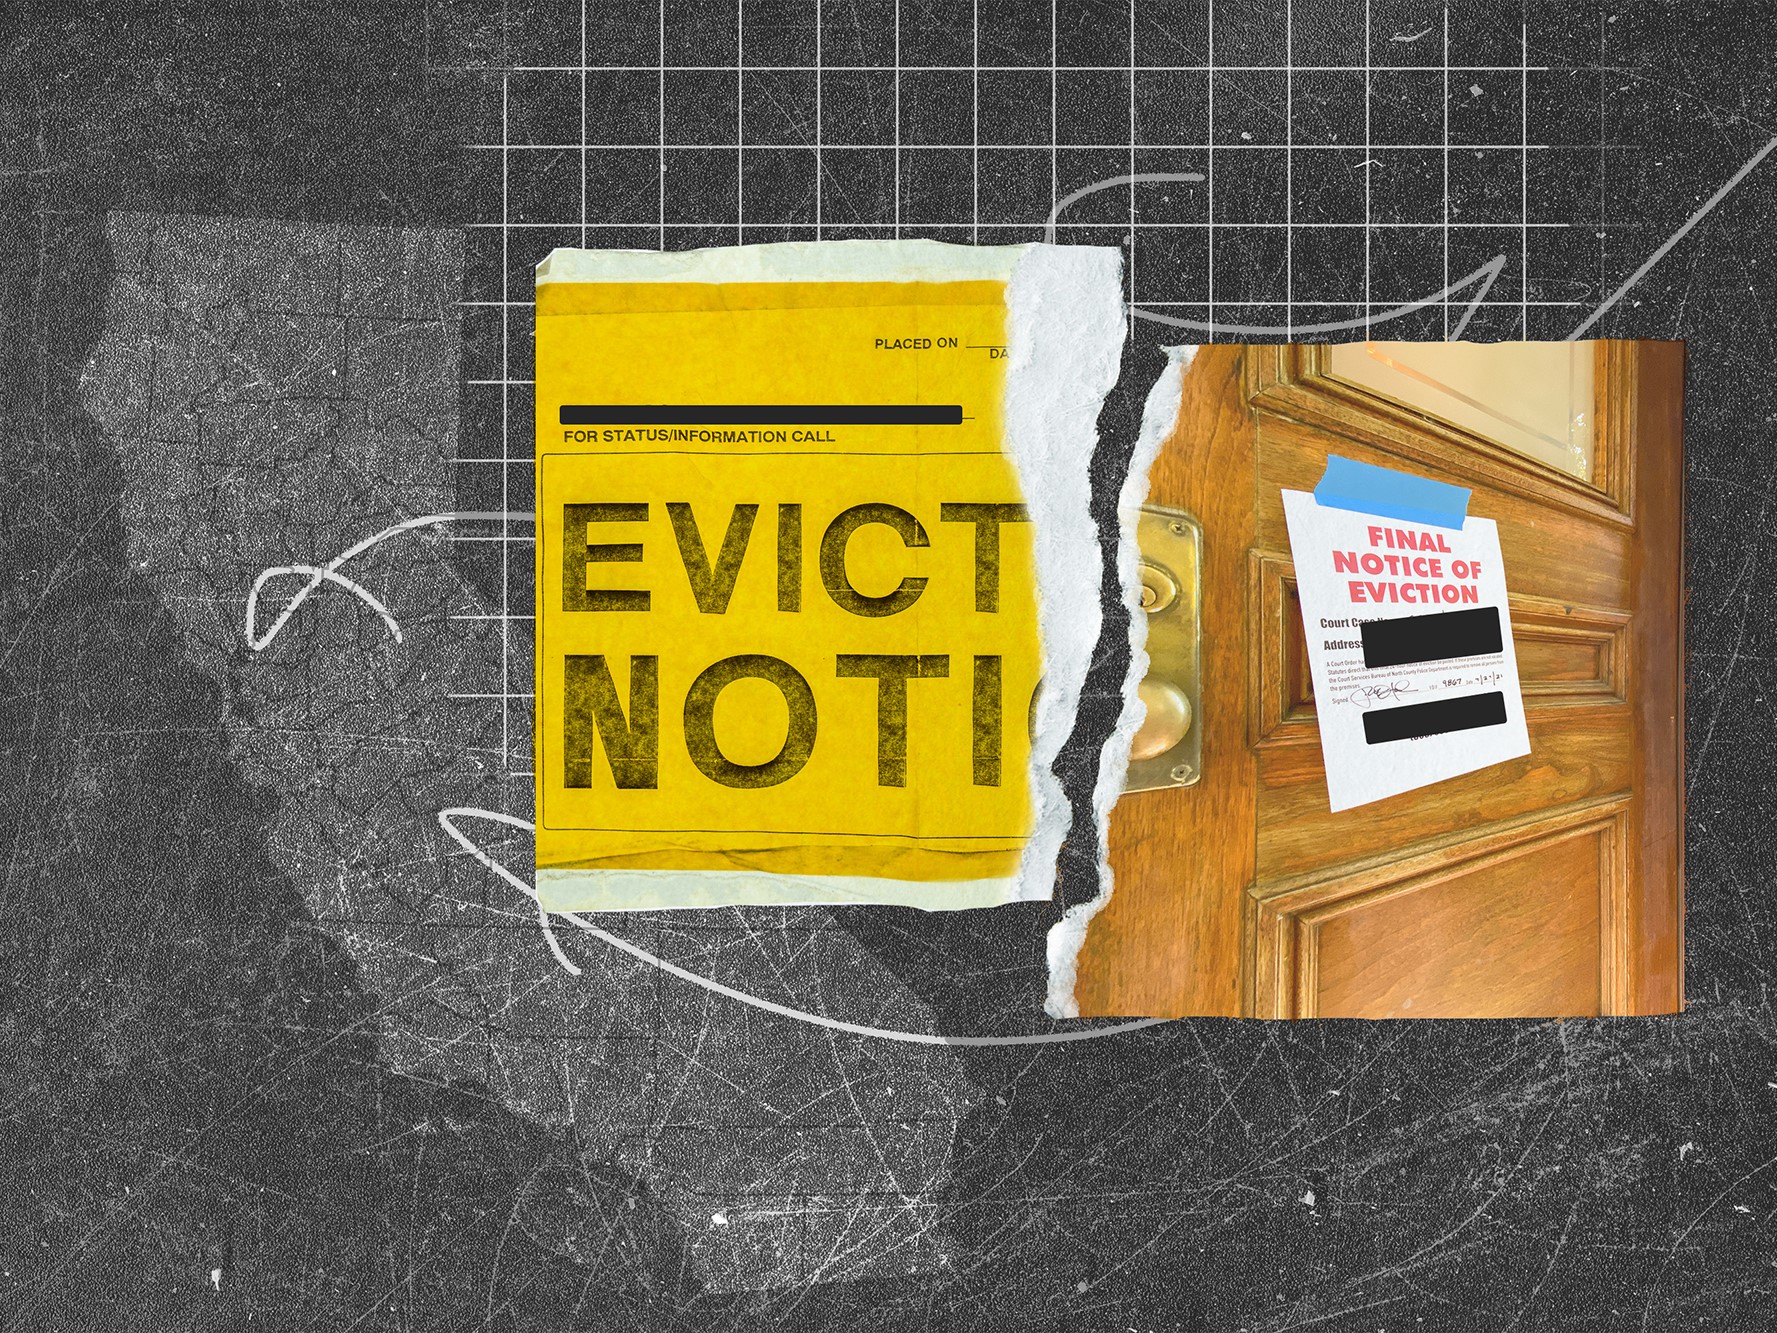 California Playbook', Evictions on the Rise